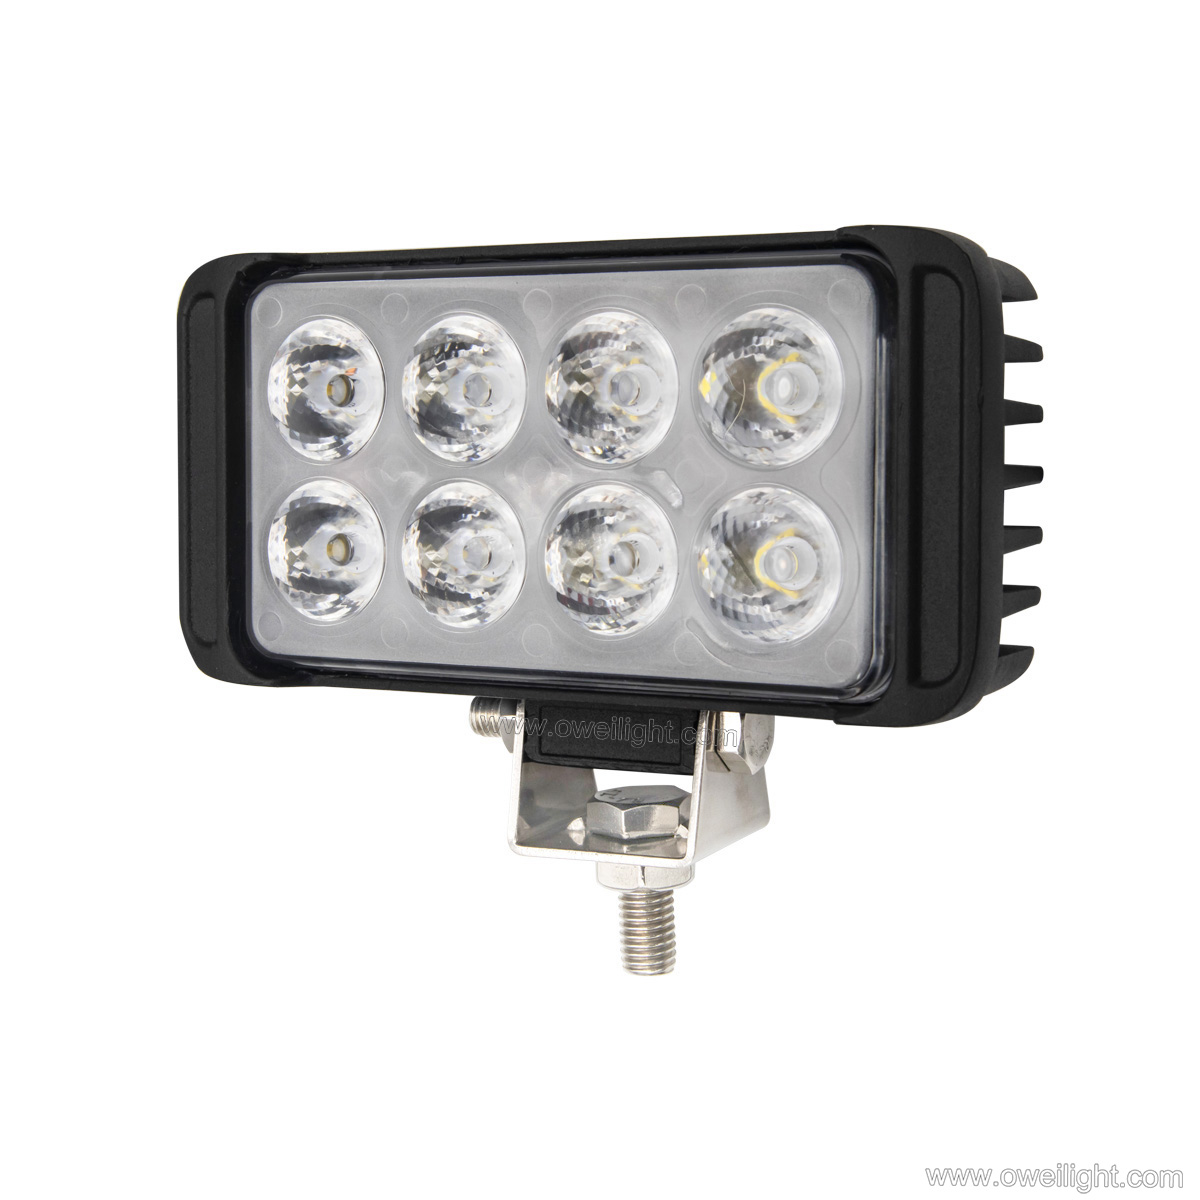 Agricultural Light - OW-4023-24W 40W